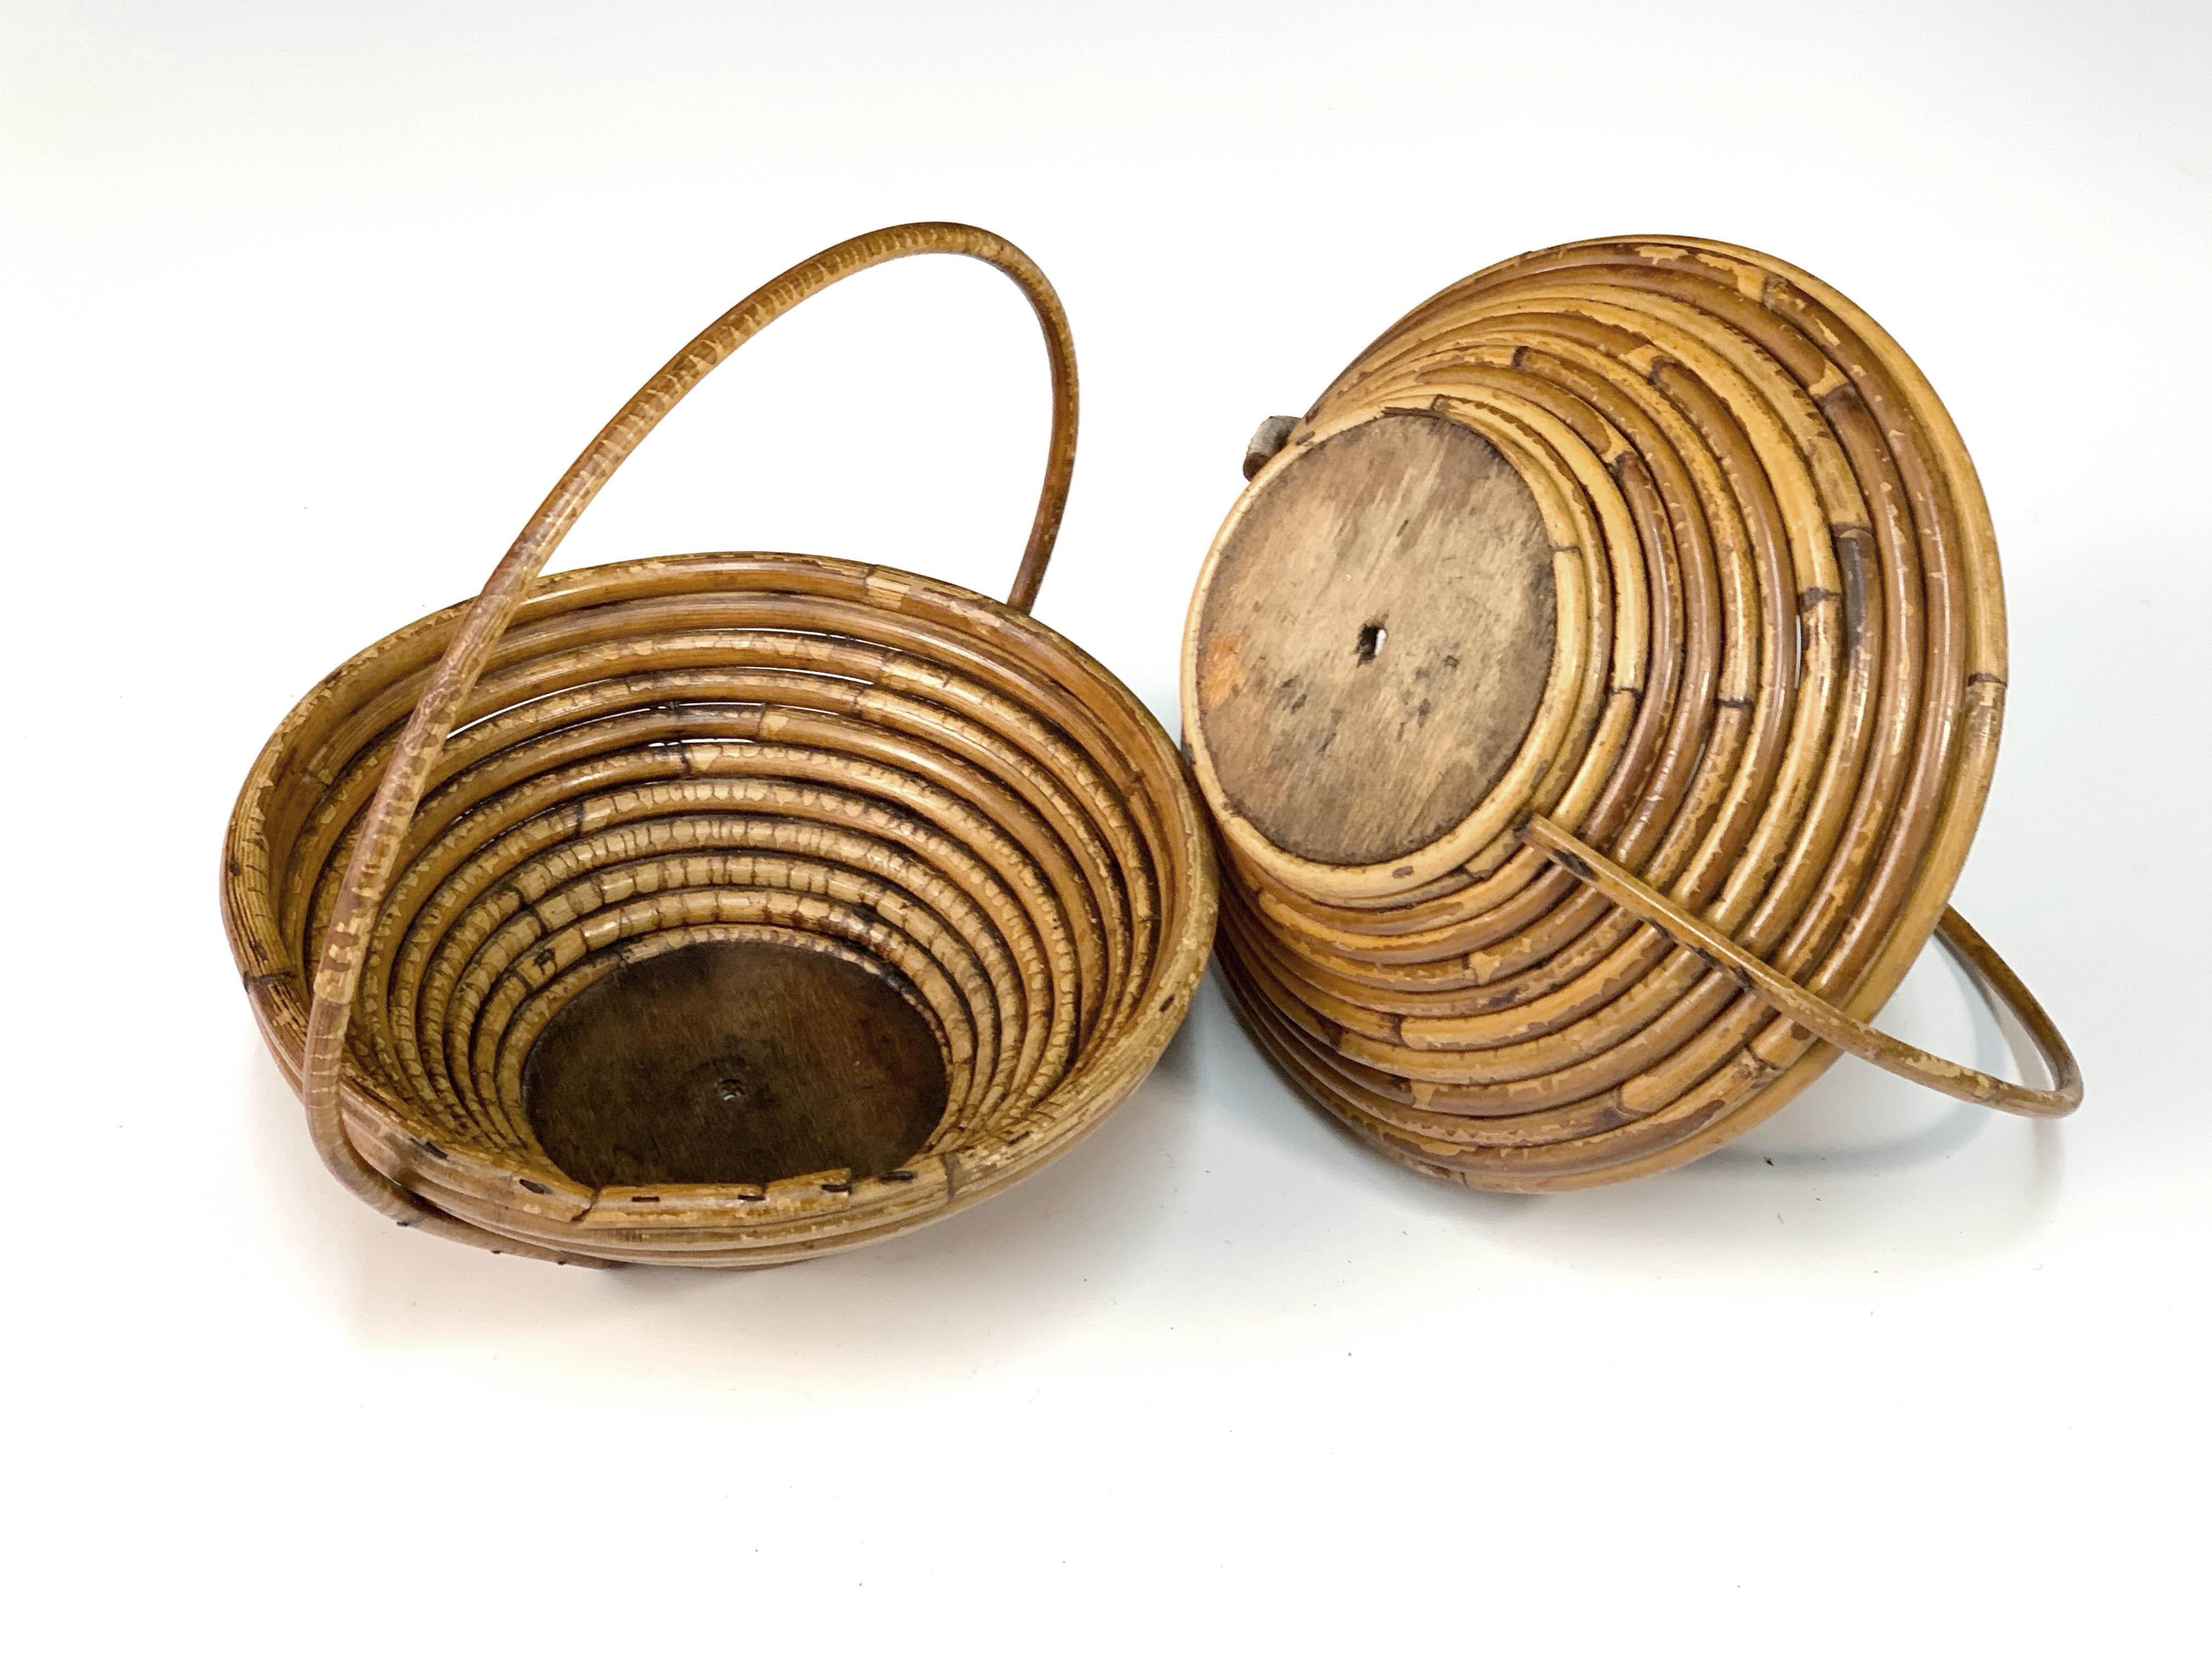 Pair of Bamboo and Rattan Midcentury Bowls, 1970s For Sale 6